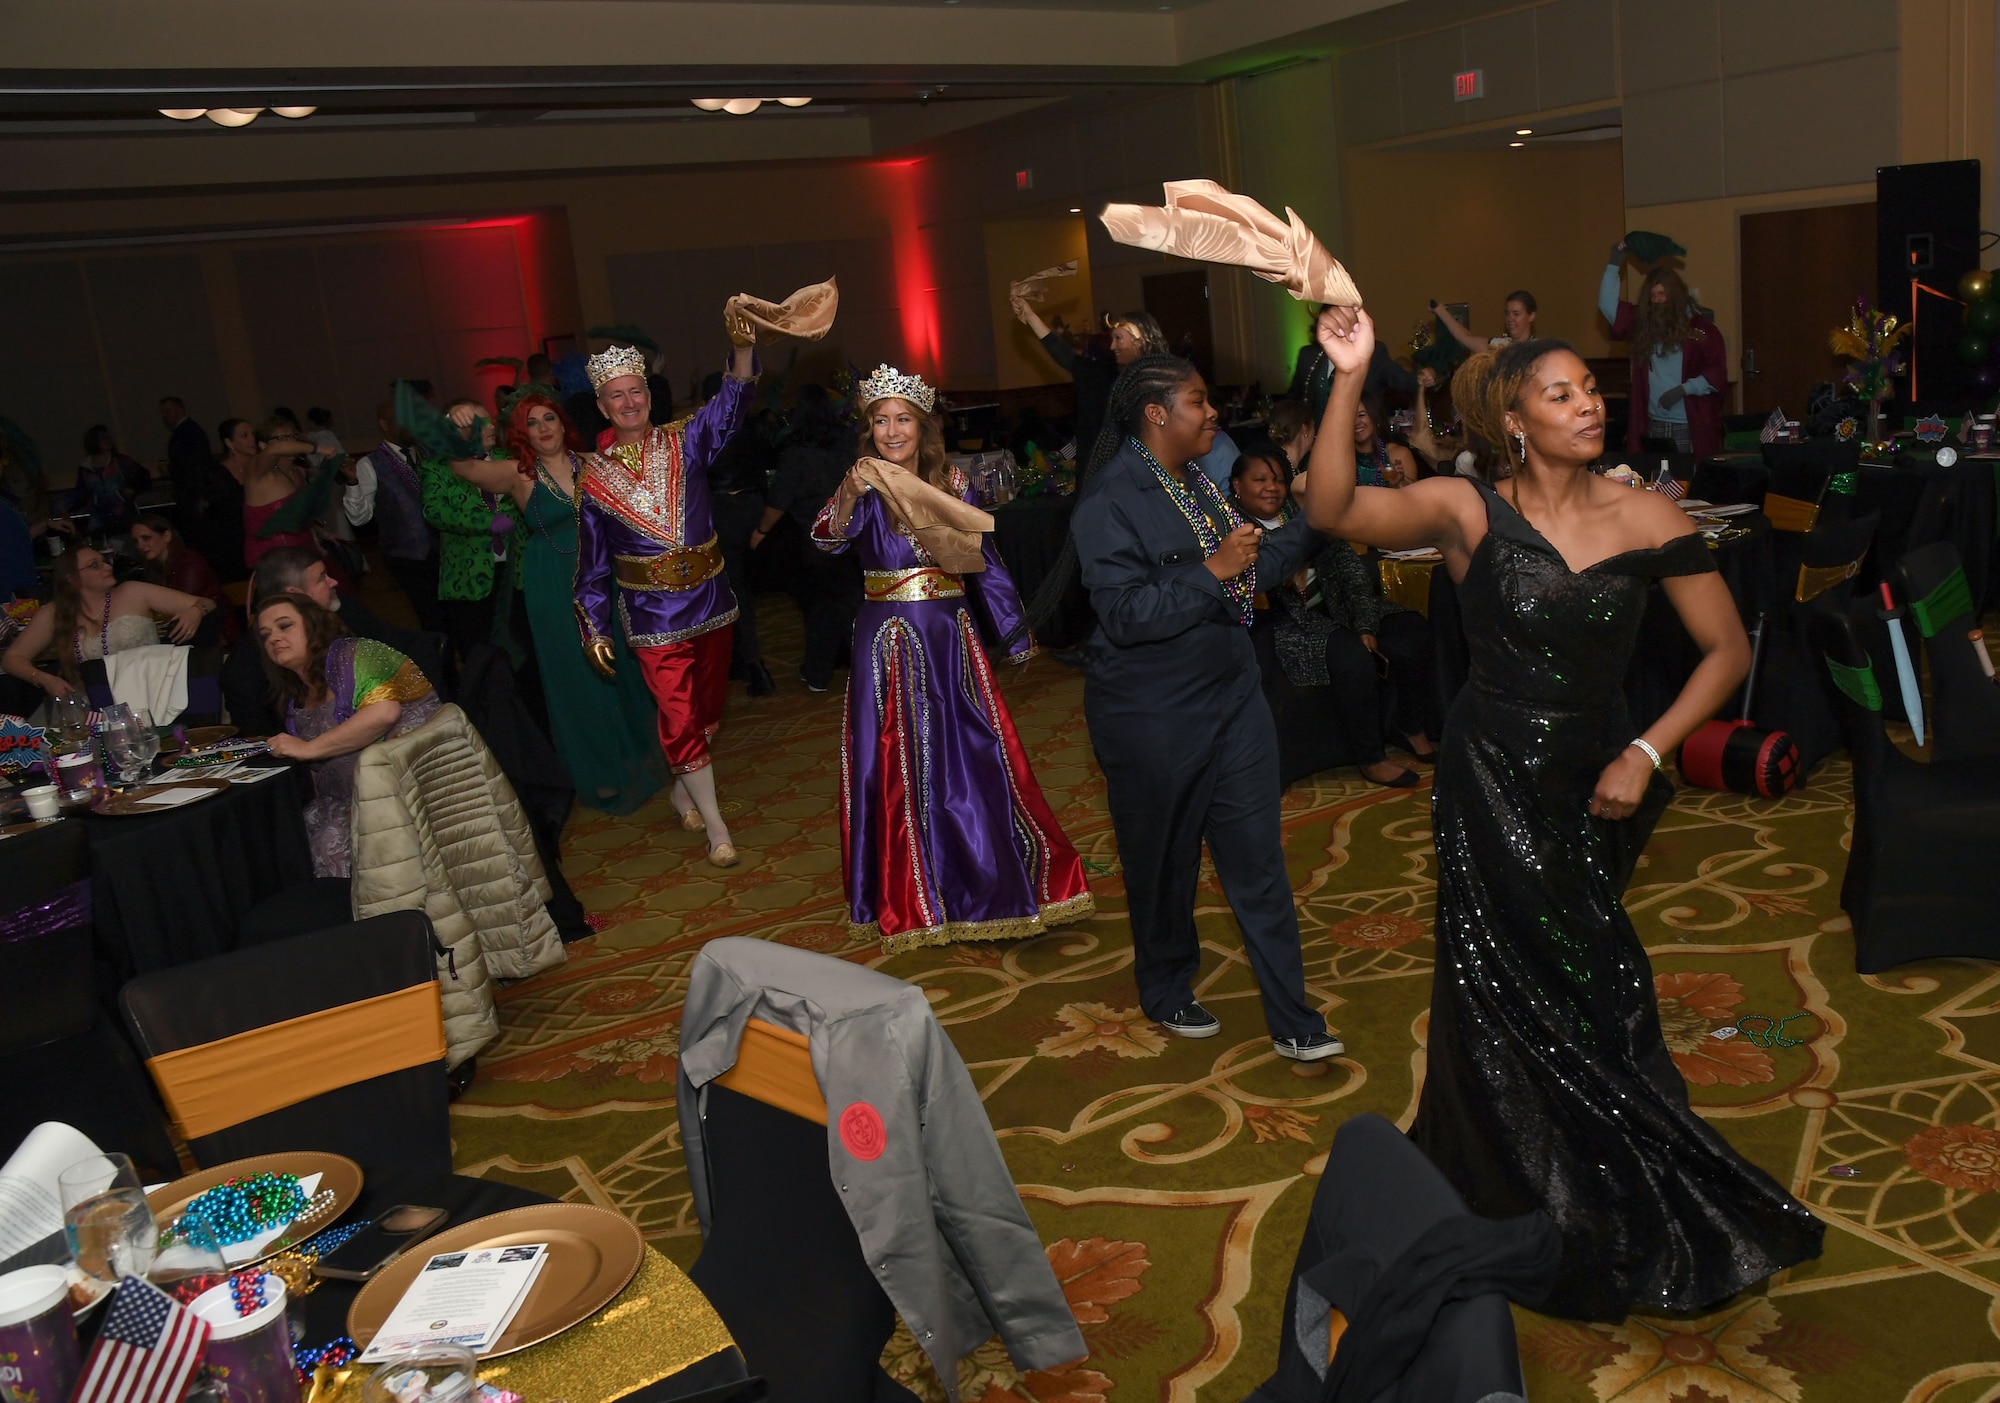 Members of the 81st Medical Group and guests participate in the second line parade during the 32nd Annual Krewe of Medics Mardi Gras Ball at the Bay Breeze Event Center on Keesler Air Force Base, Mississippi, Feb. 11, 2023.